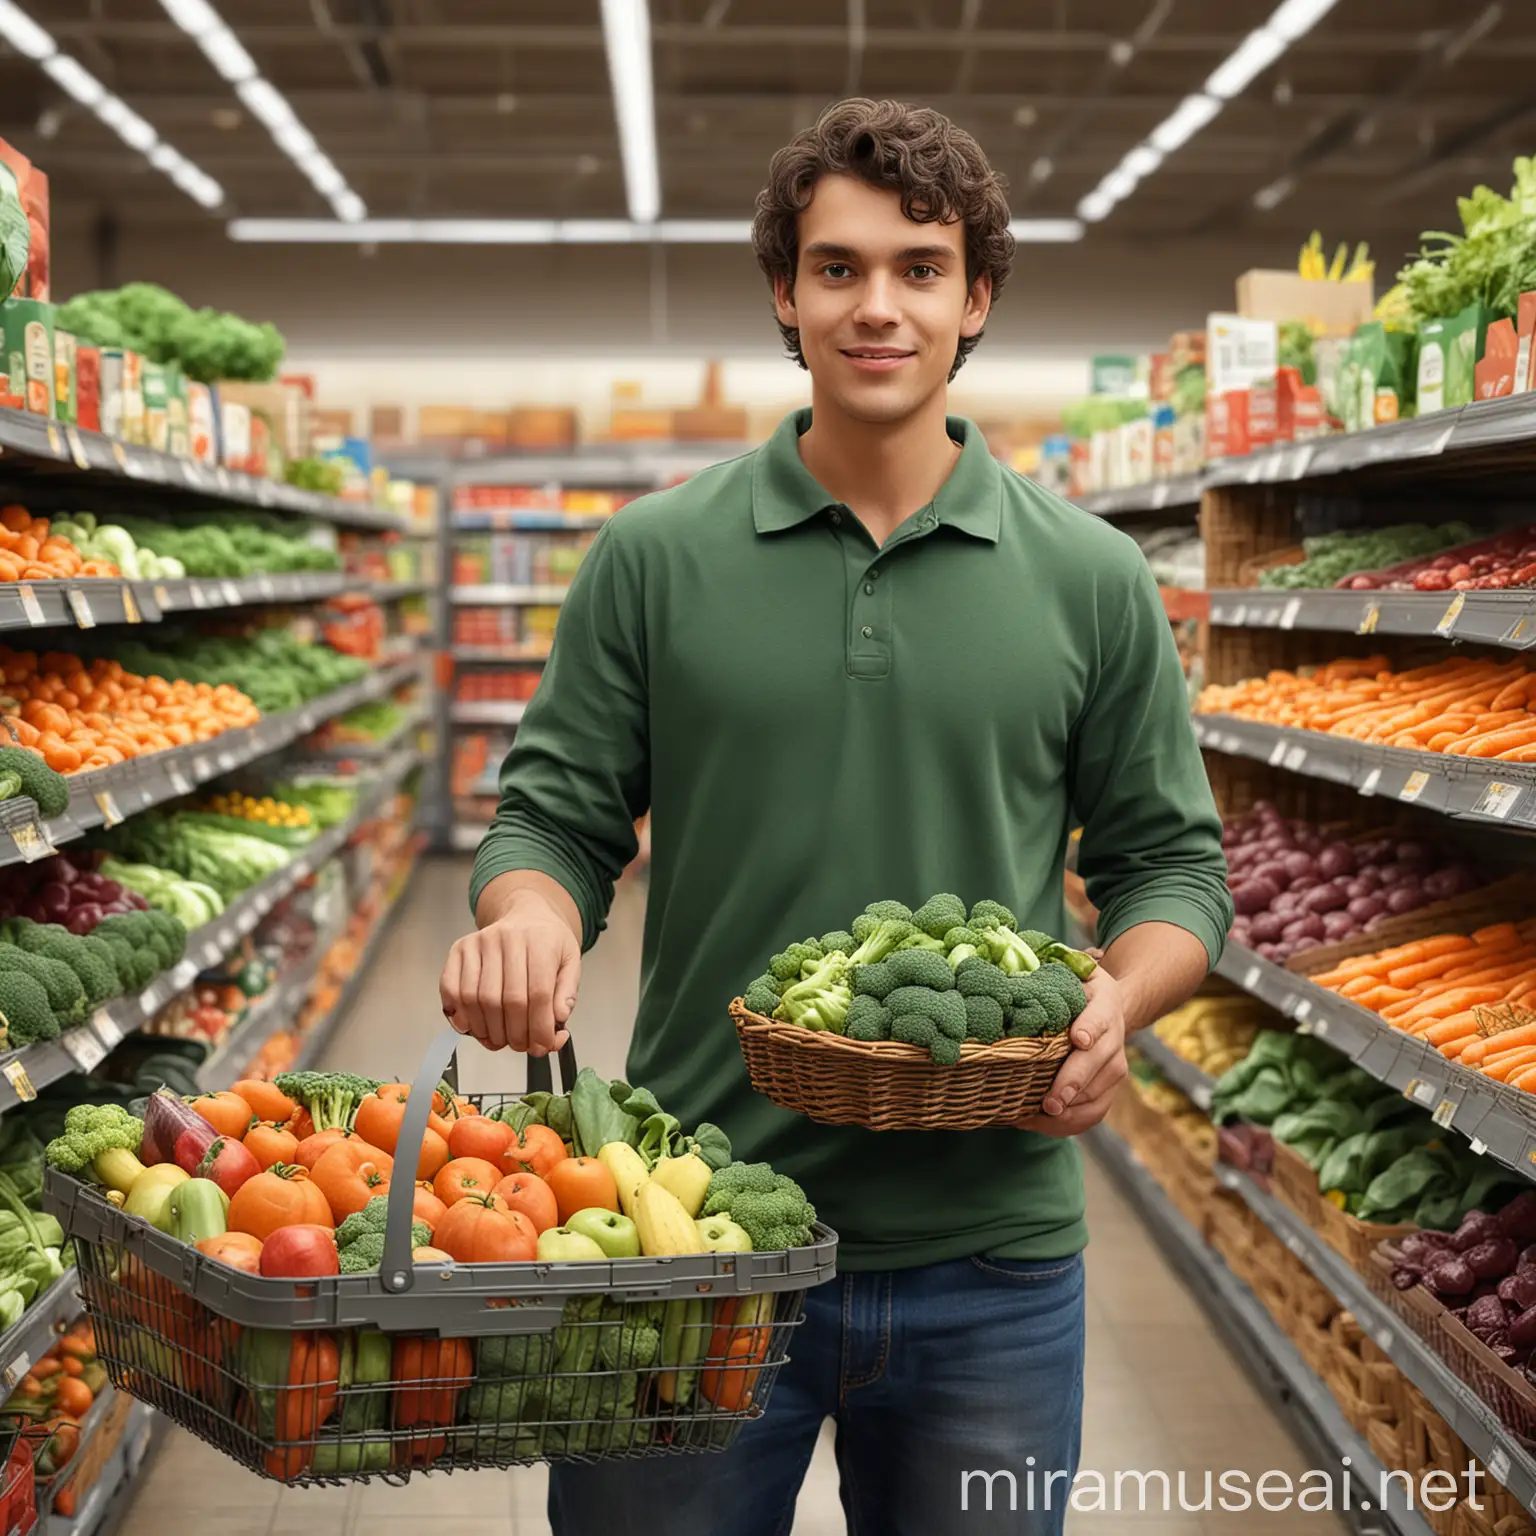 The image shows a grocery store setting. A young man, who appears to be the manager, is holding a basket filled with fresh produce including broccoli, carrots, and apples. The grocery store shelves are stocked with various products including multiple bottles and boxes of food. The background is blurred out to emphasize the man and basket of produce, hyper realistic 3D